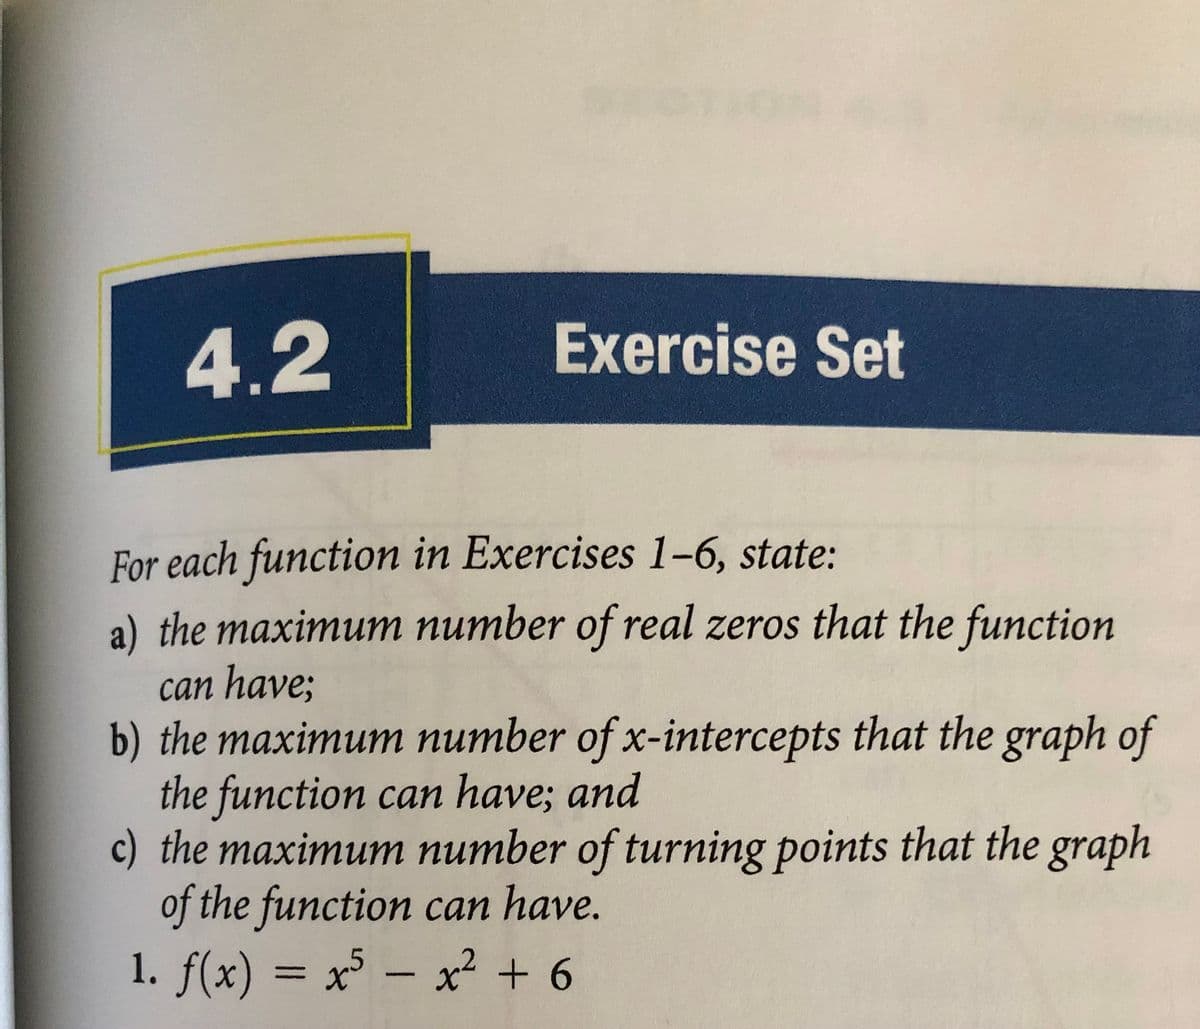 4.2
Exercise Set
For each function in Exercises 1-6, state:
a) the maximum number of real zeros that the function
can have;
b) the maximum number of x-intercepts that the graph of
the function can have; and
c) the maximum number of turning points that the graph
of the function can have.
1. f(x) = x – x² + 6
